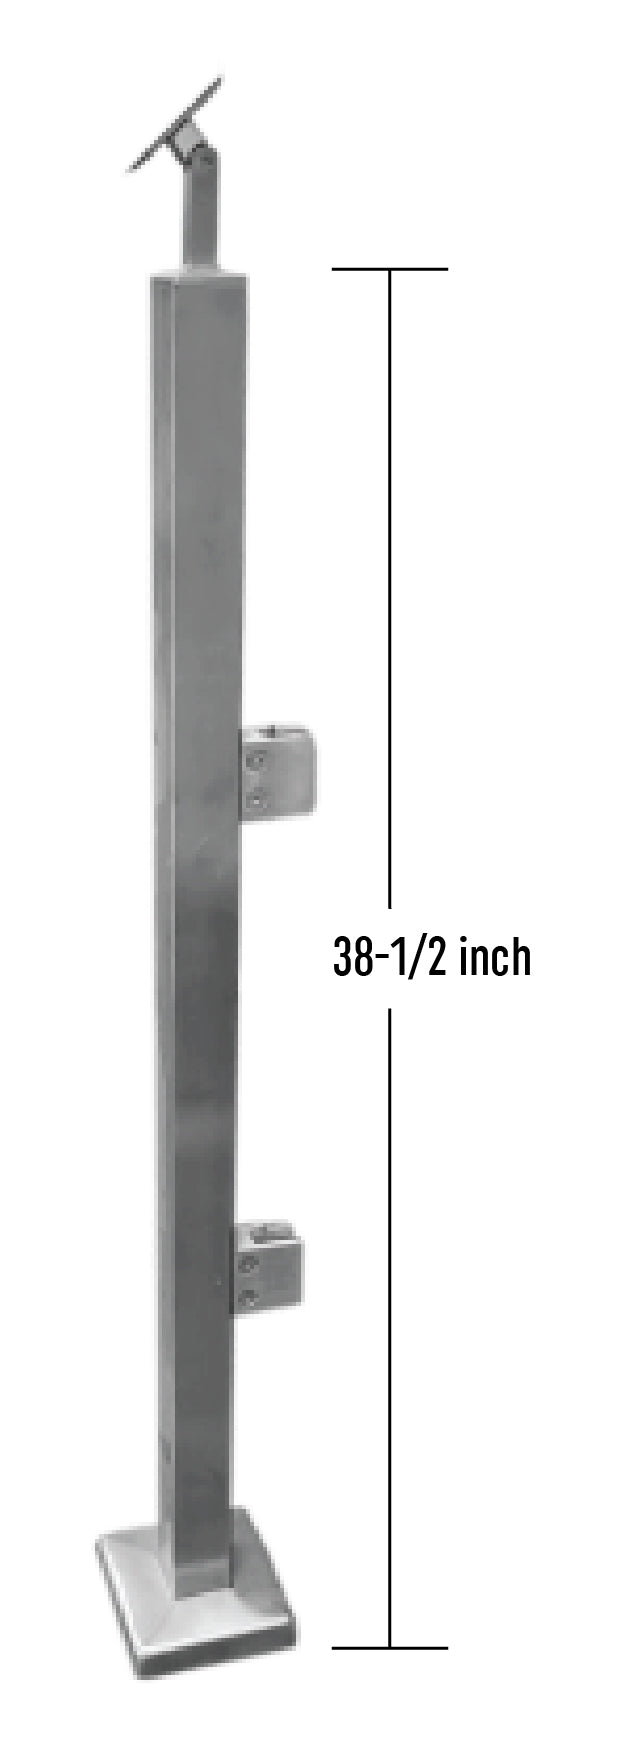 IPSQ40S42E316 Square Stainless Steel Post End Height- 42" SS316